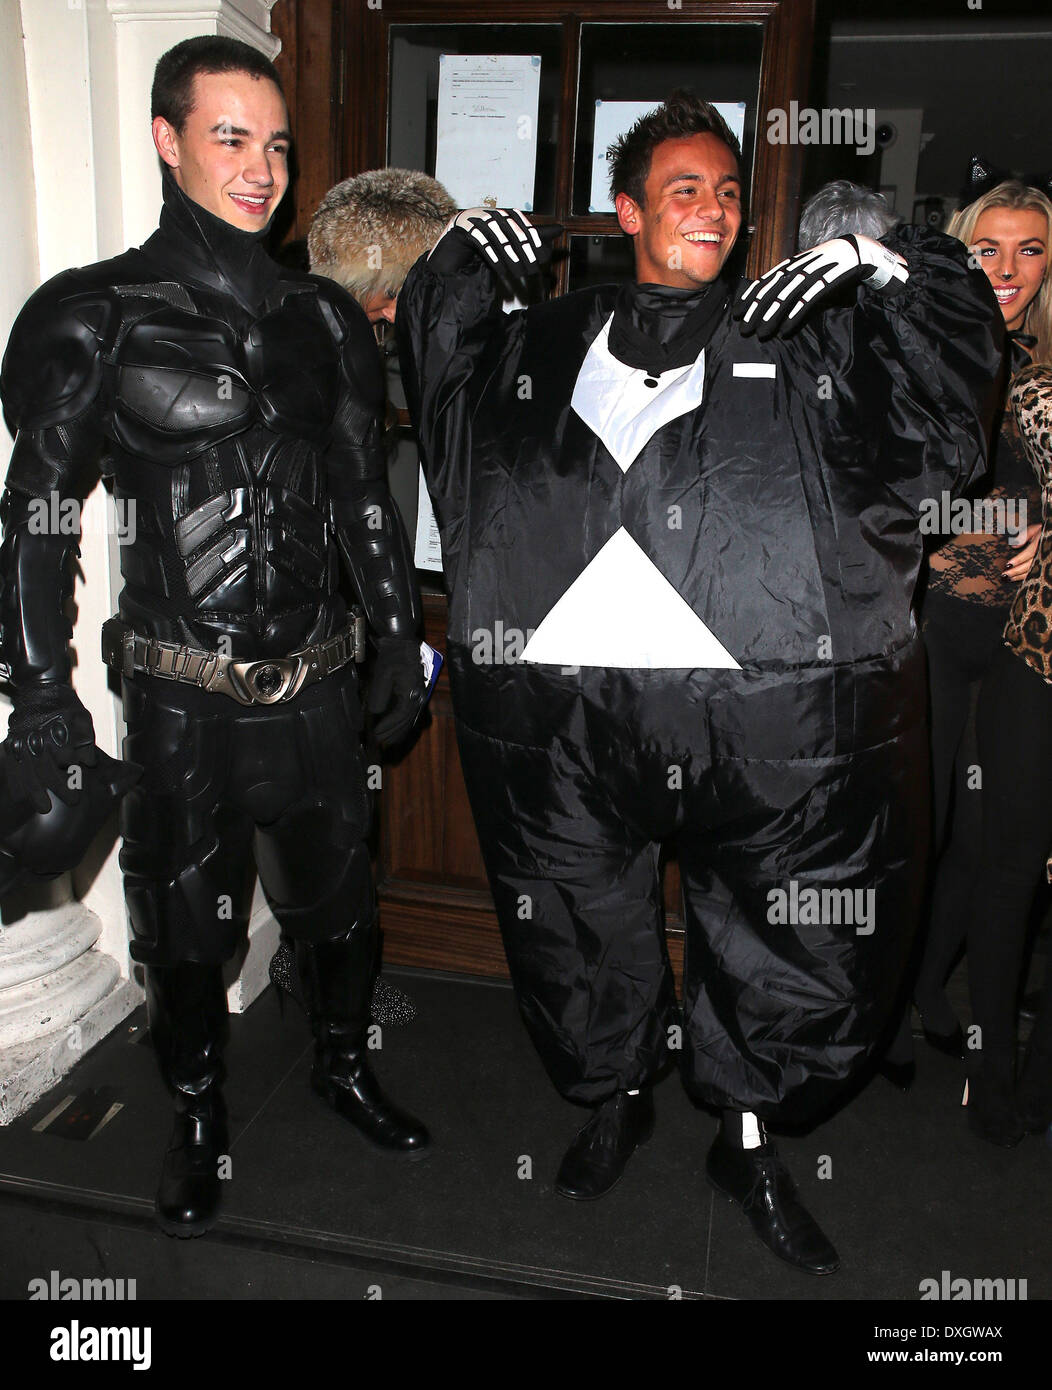 Liam Payne of One Direction dressed as Batman and Tom Daley in a fat skeleton costume Celebrities at Funky Buddha nightclub for a Halloween party London, England - 28.10.12 Where: London, LONDON, United Kingdom When: 28 Oct 2012 Stock Photo